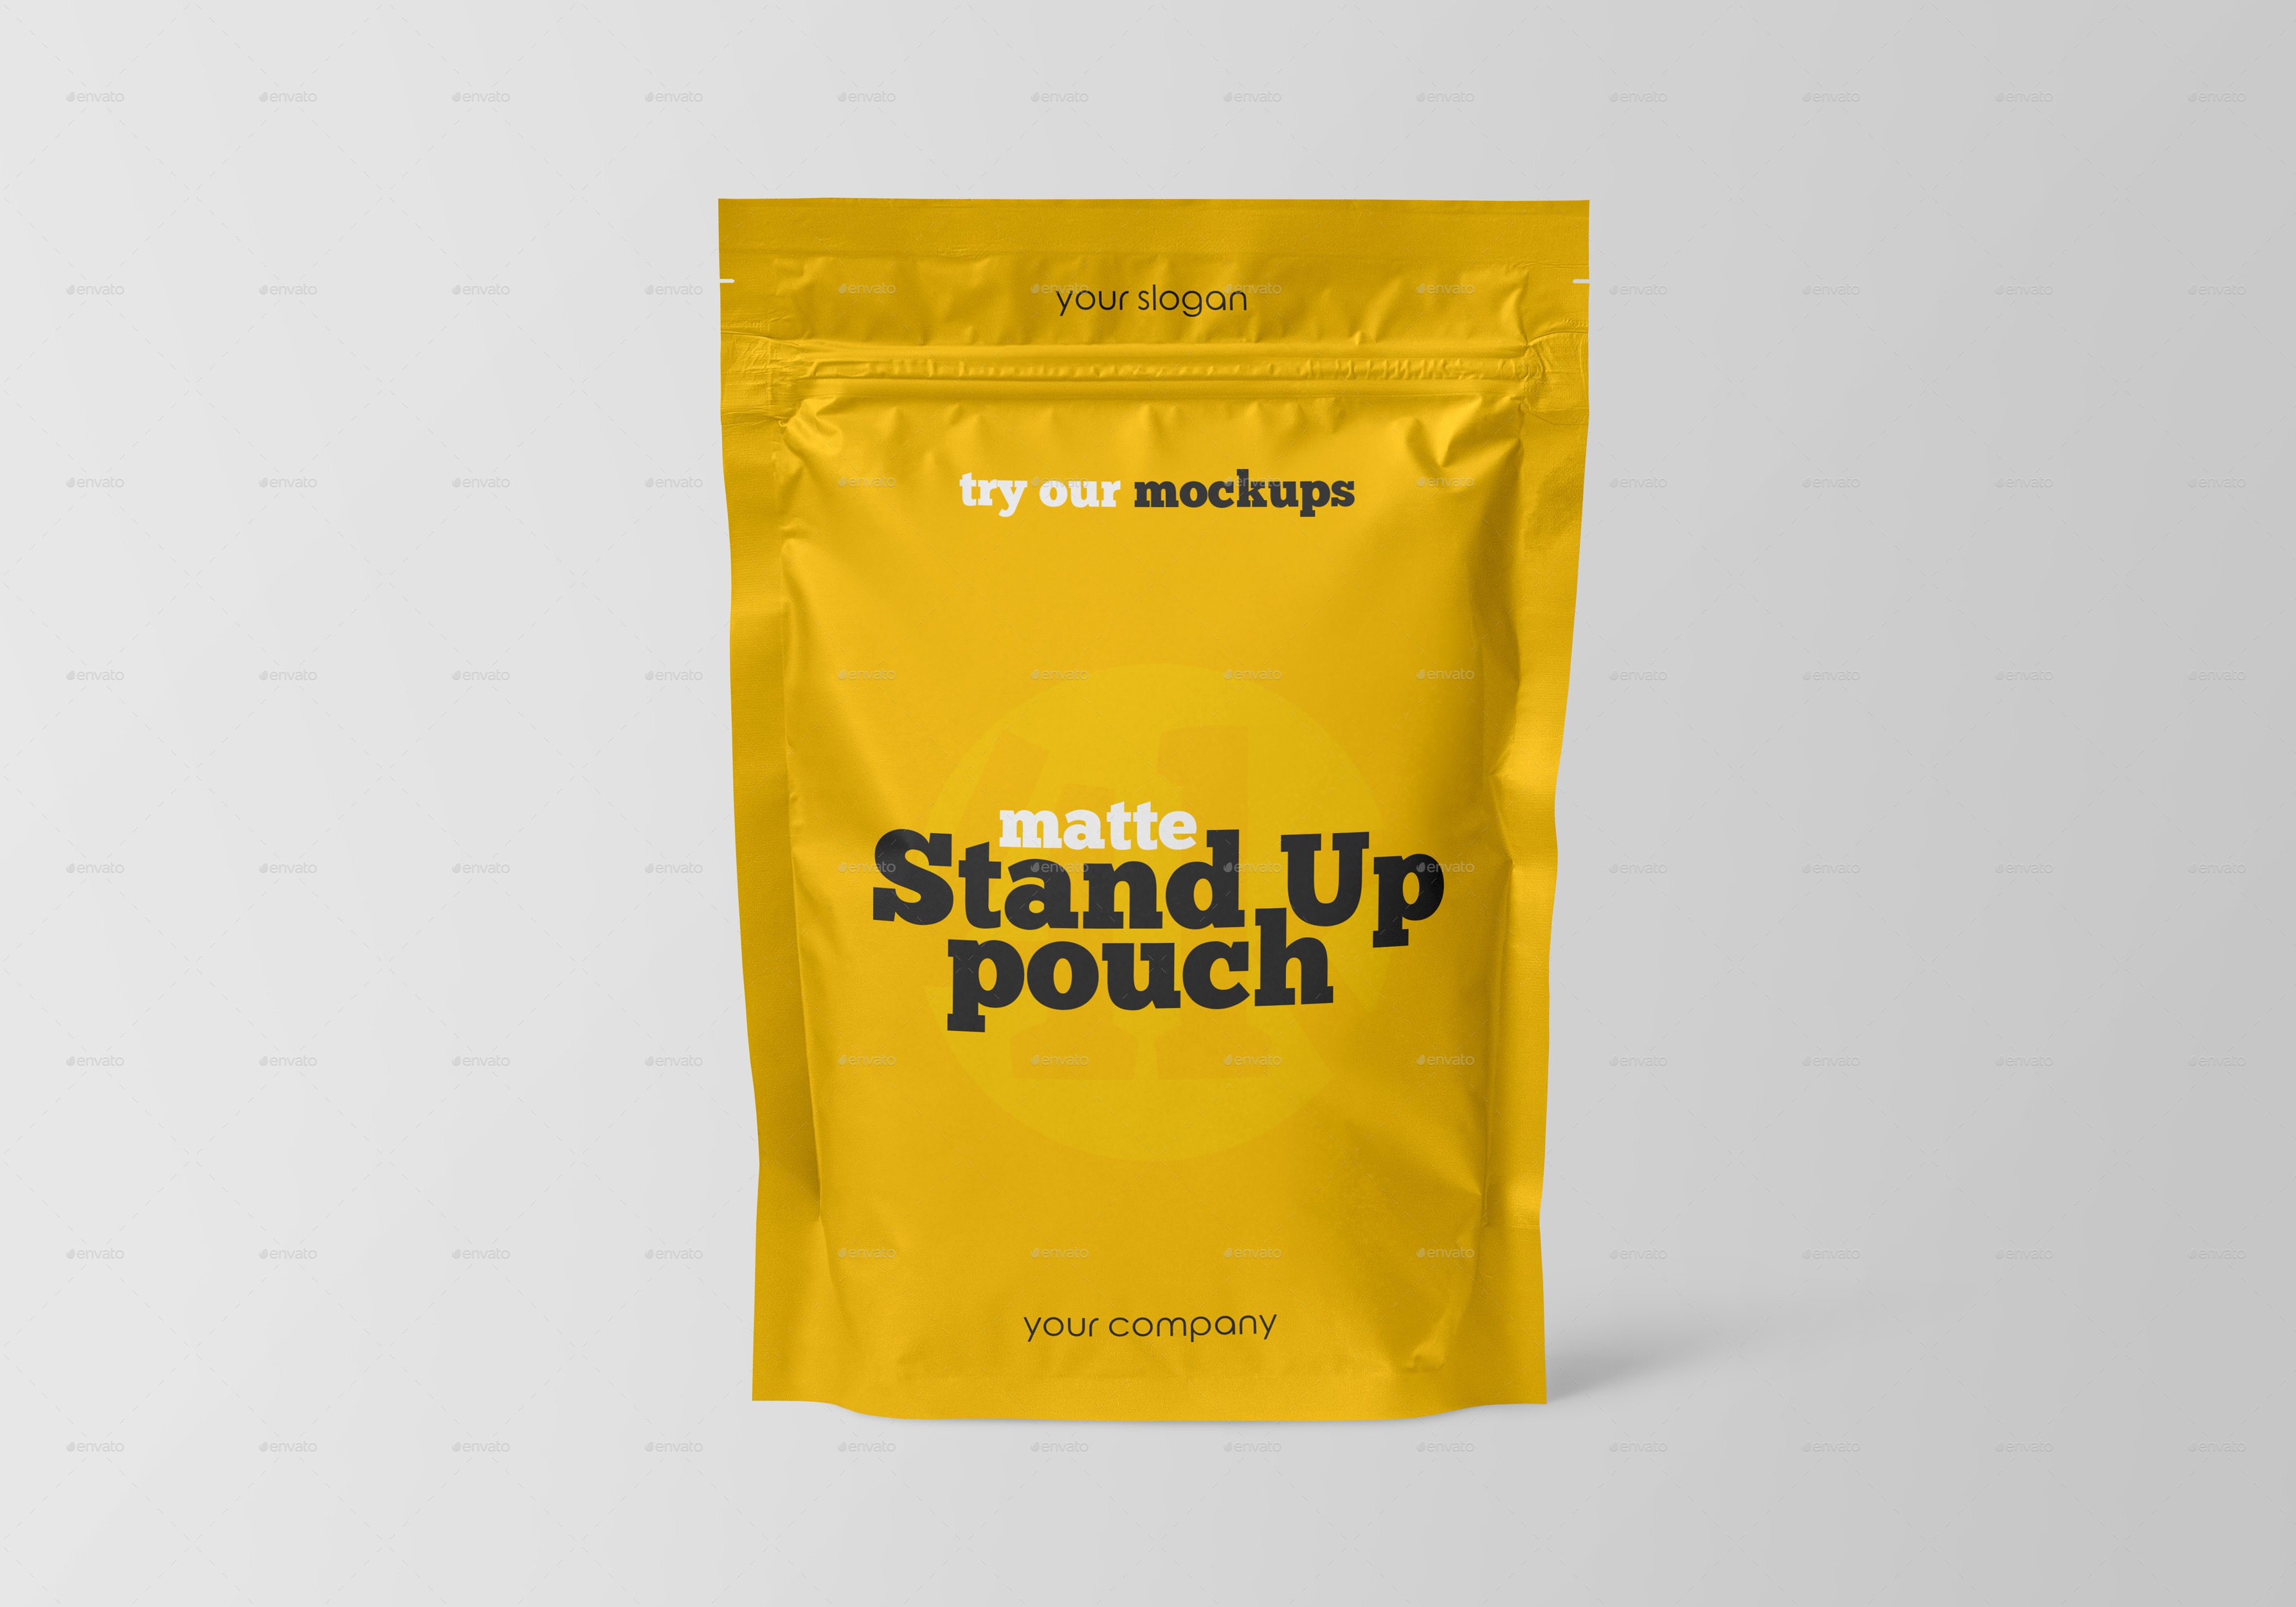 Download Matte Stand-Up Pouch Mockup Set by Country4k | GraphicRiver